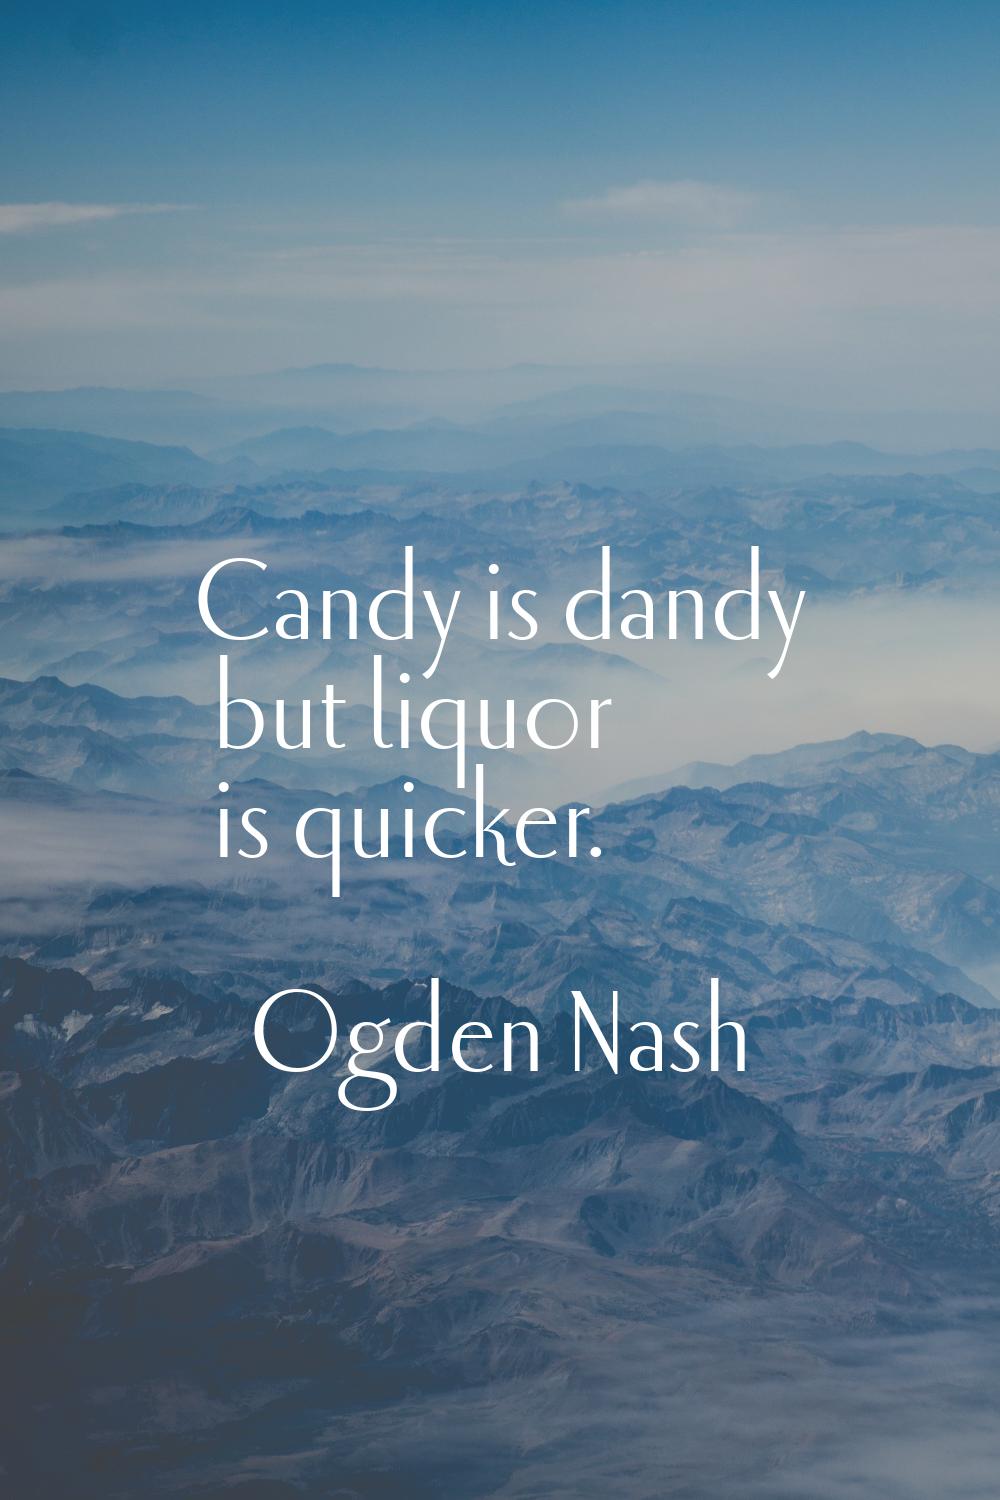 Candy is dandy but liquor is quicker.